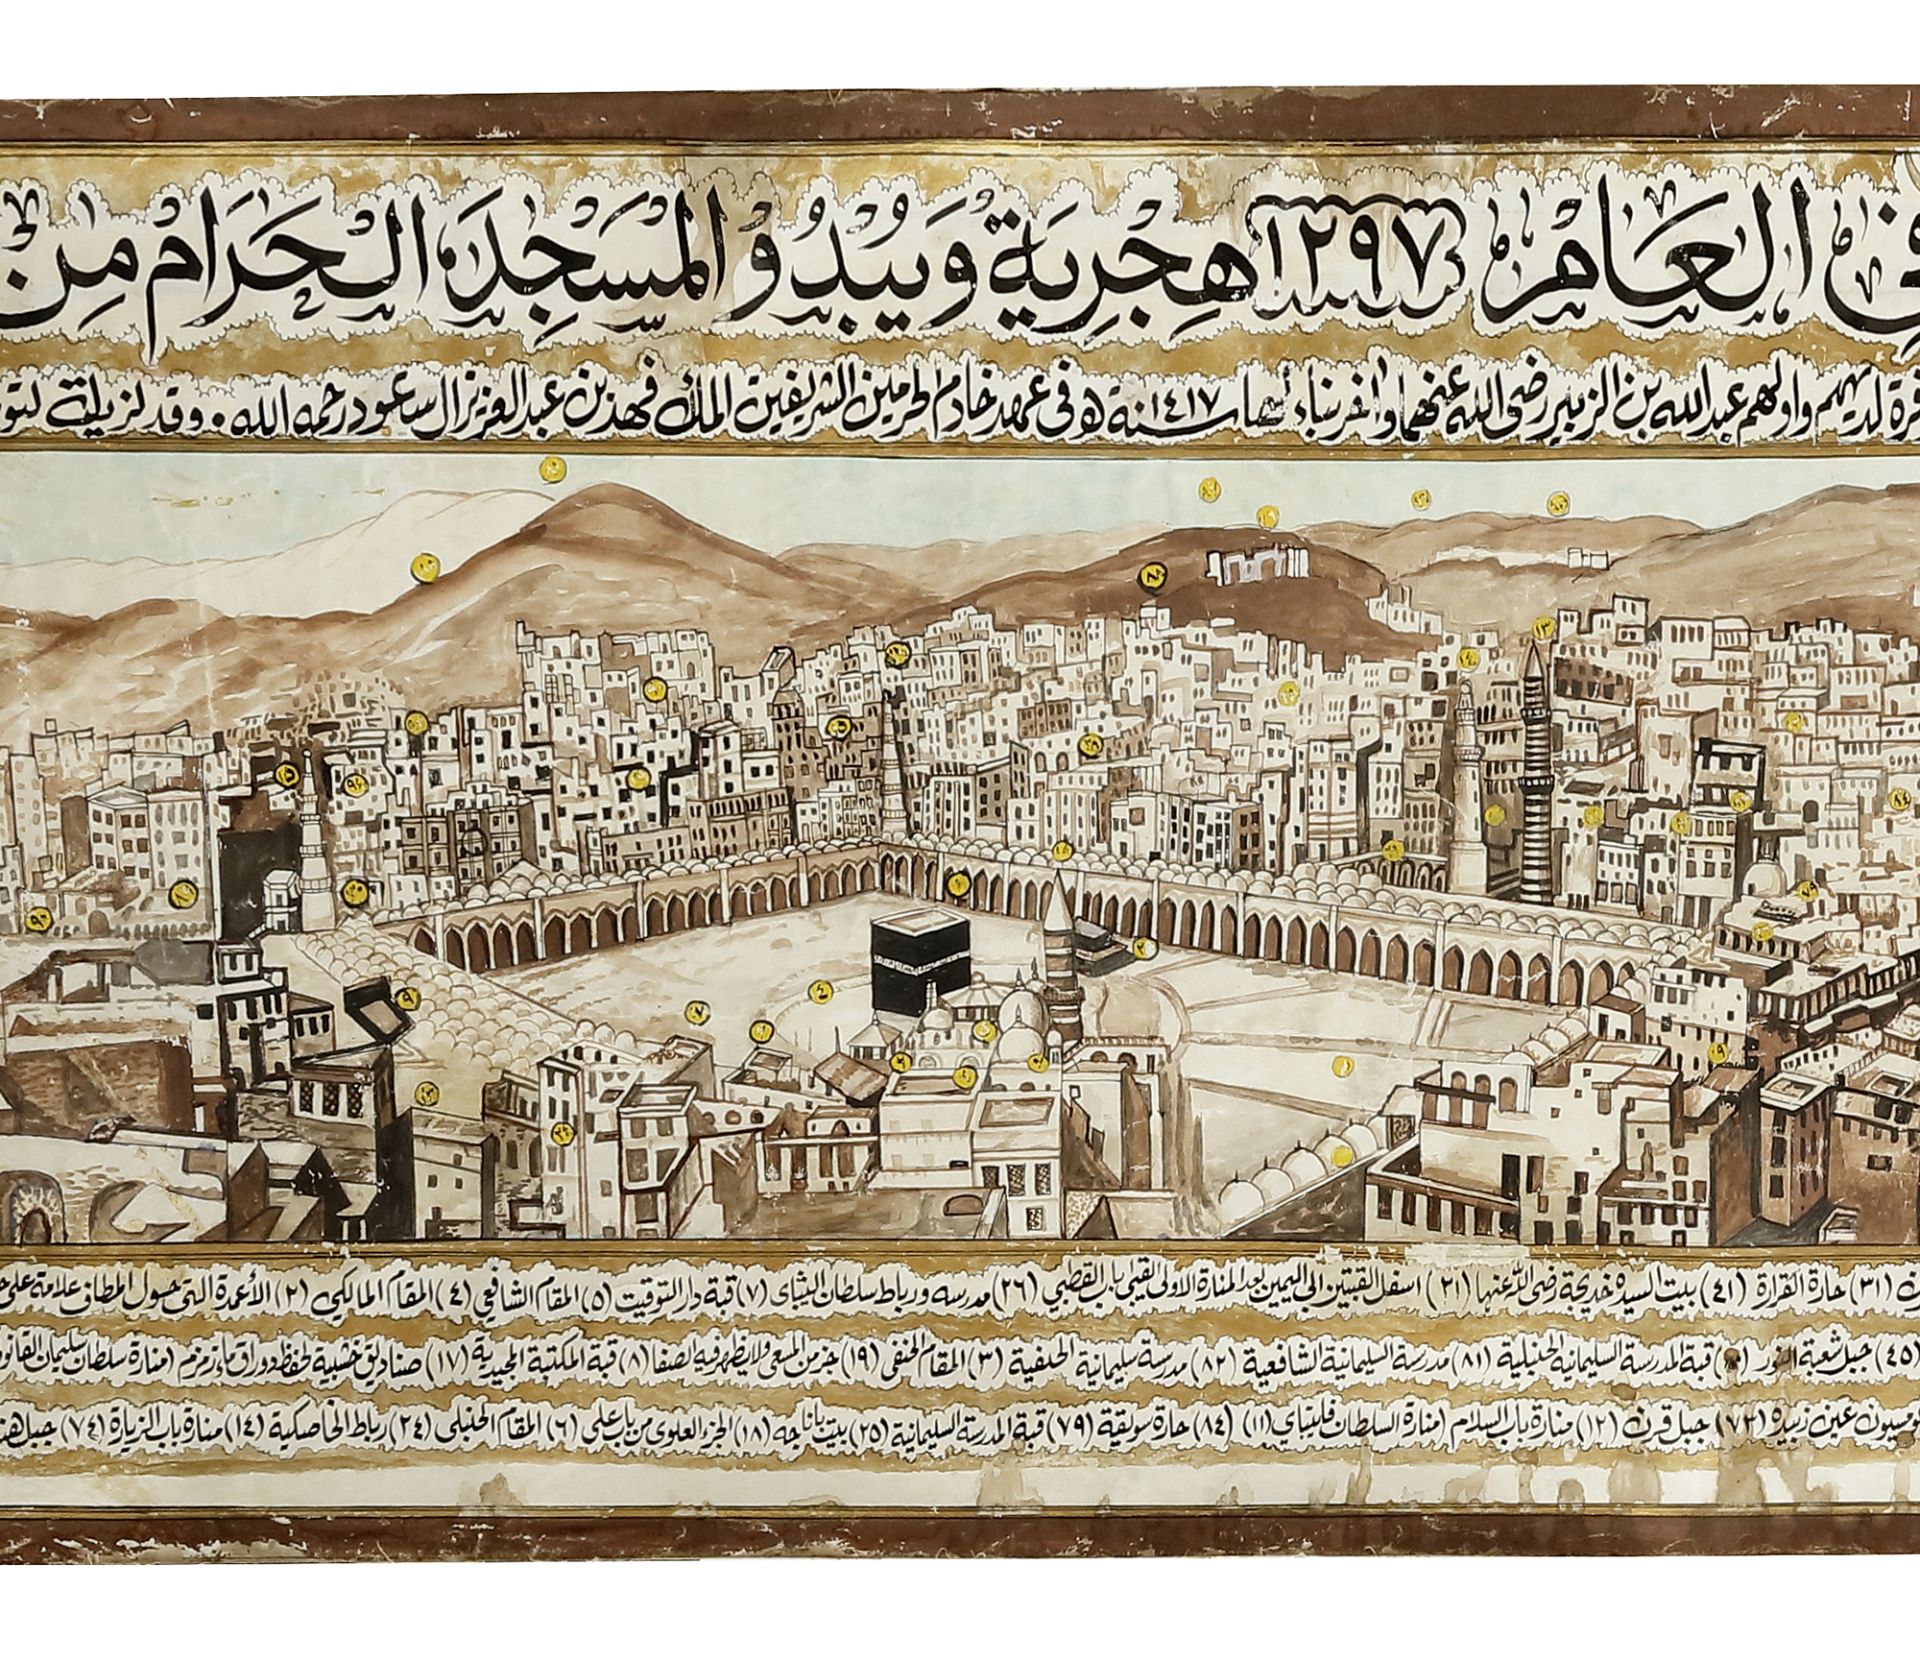 A LARGE ROLL DEPICTING A PANORAMA VIEW OF MECCA, DATED 1417 AH/1996 AD - Image 3 of 3